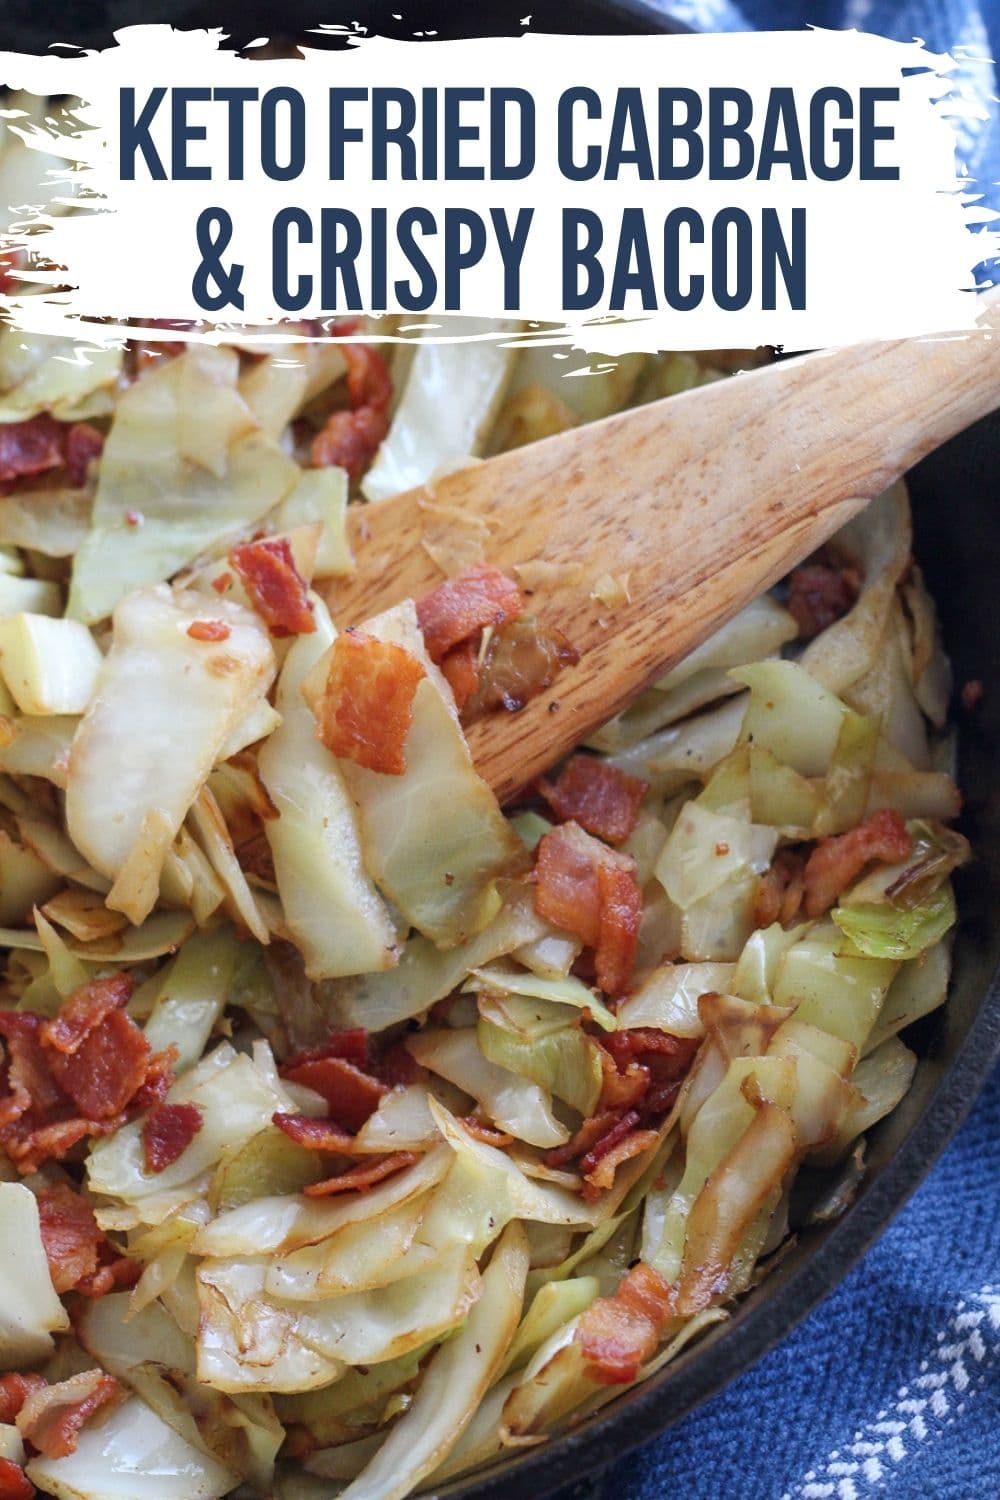 FRIED CABBAGE IN A SKILLET WITH A WOODEN SPOON